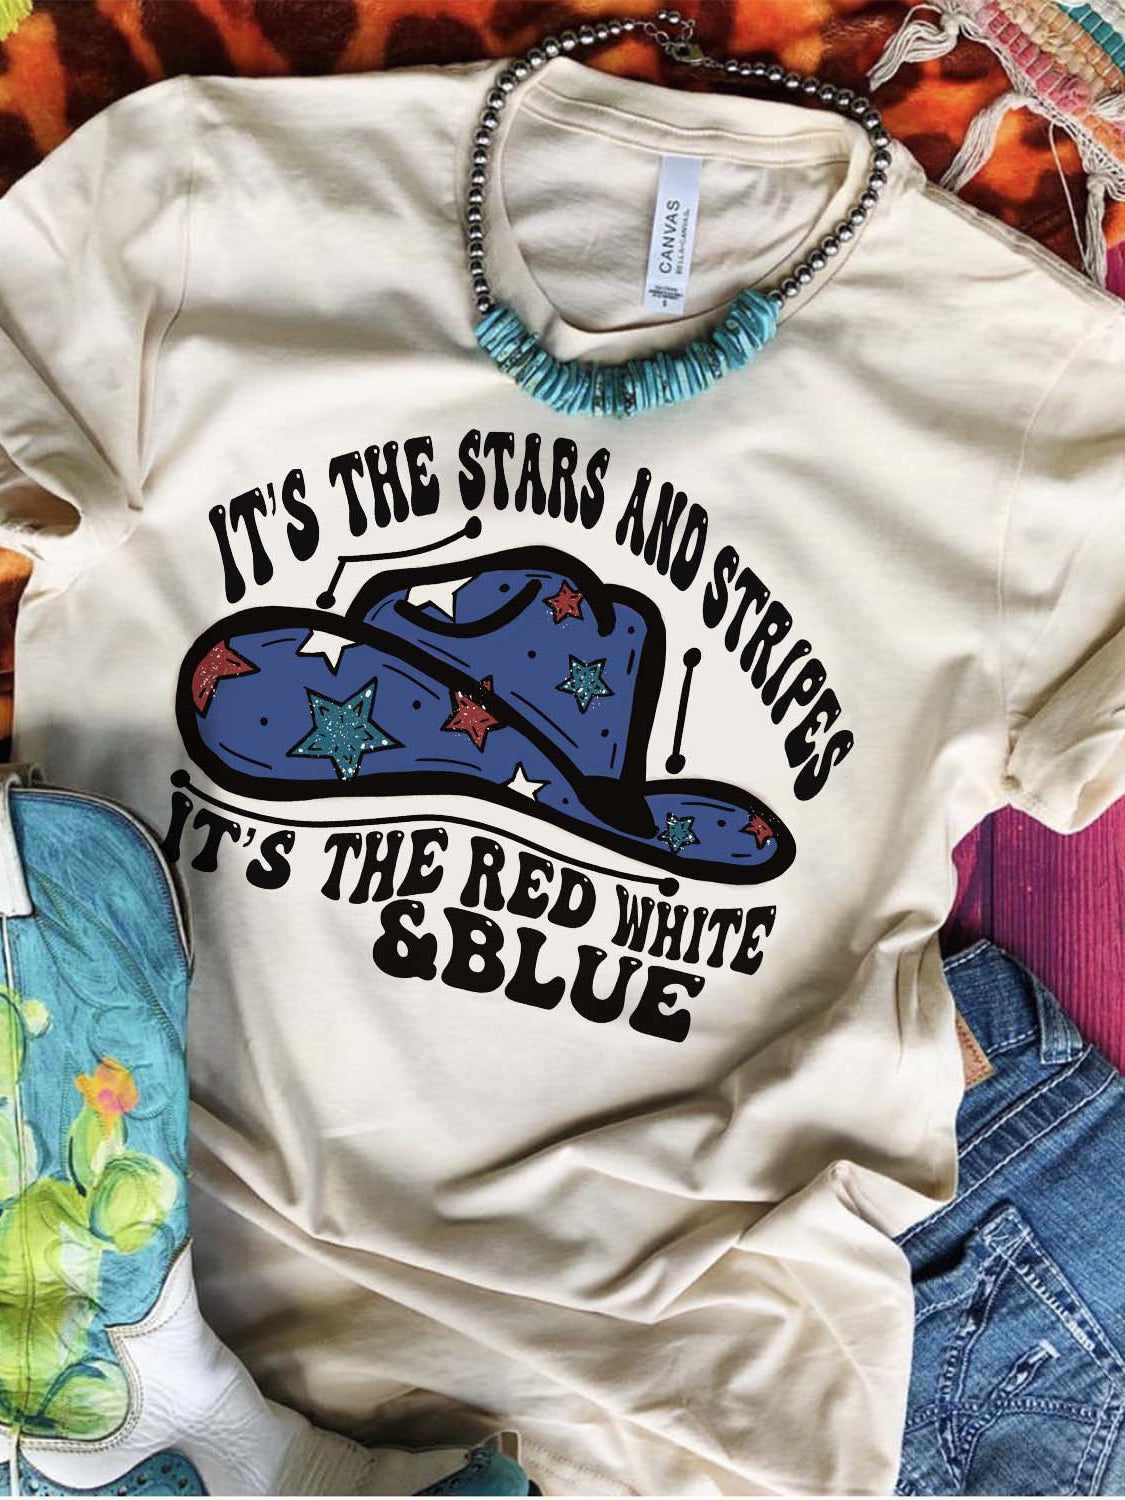 Stars and Stripes t-shirt with cowboy hat.